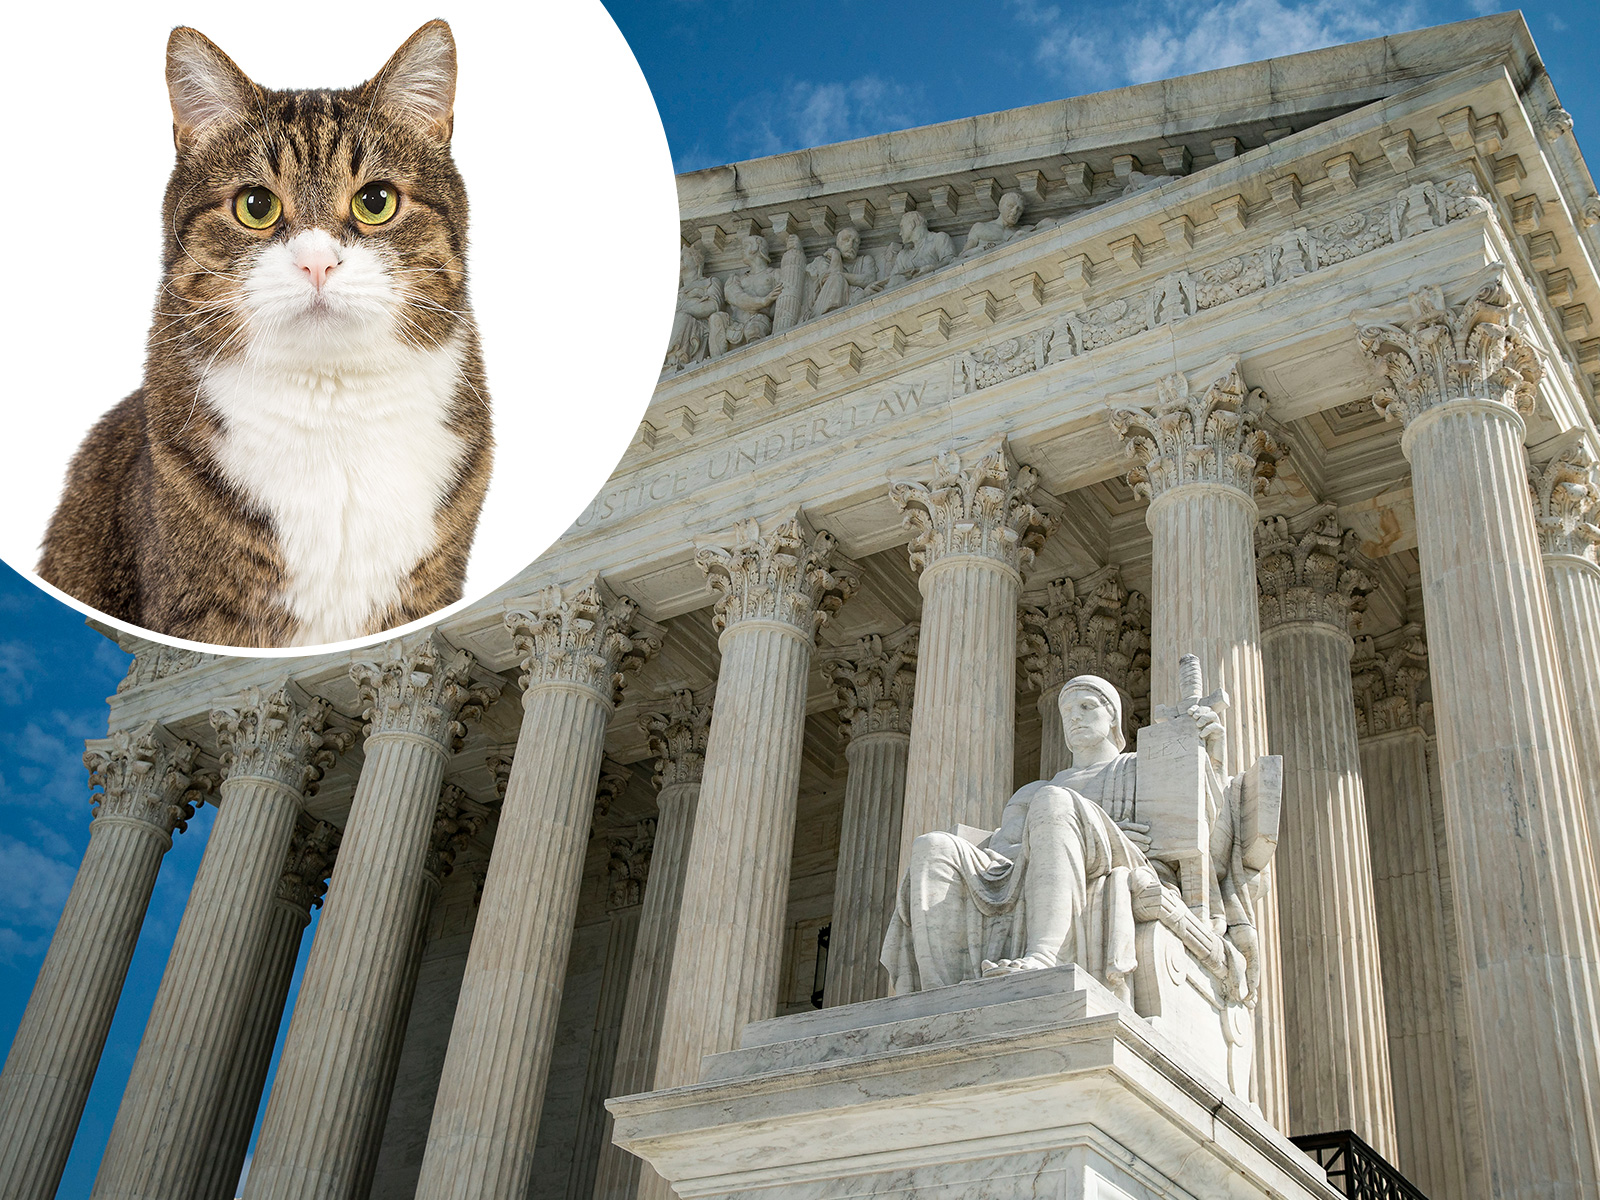 Can a Cat Be Elected Speaker of the House?